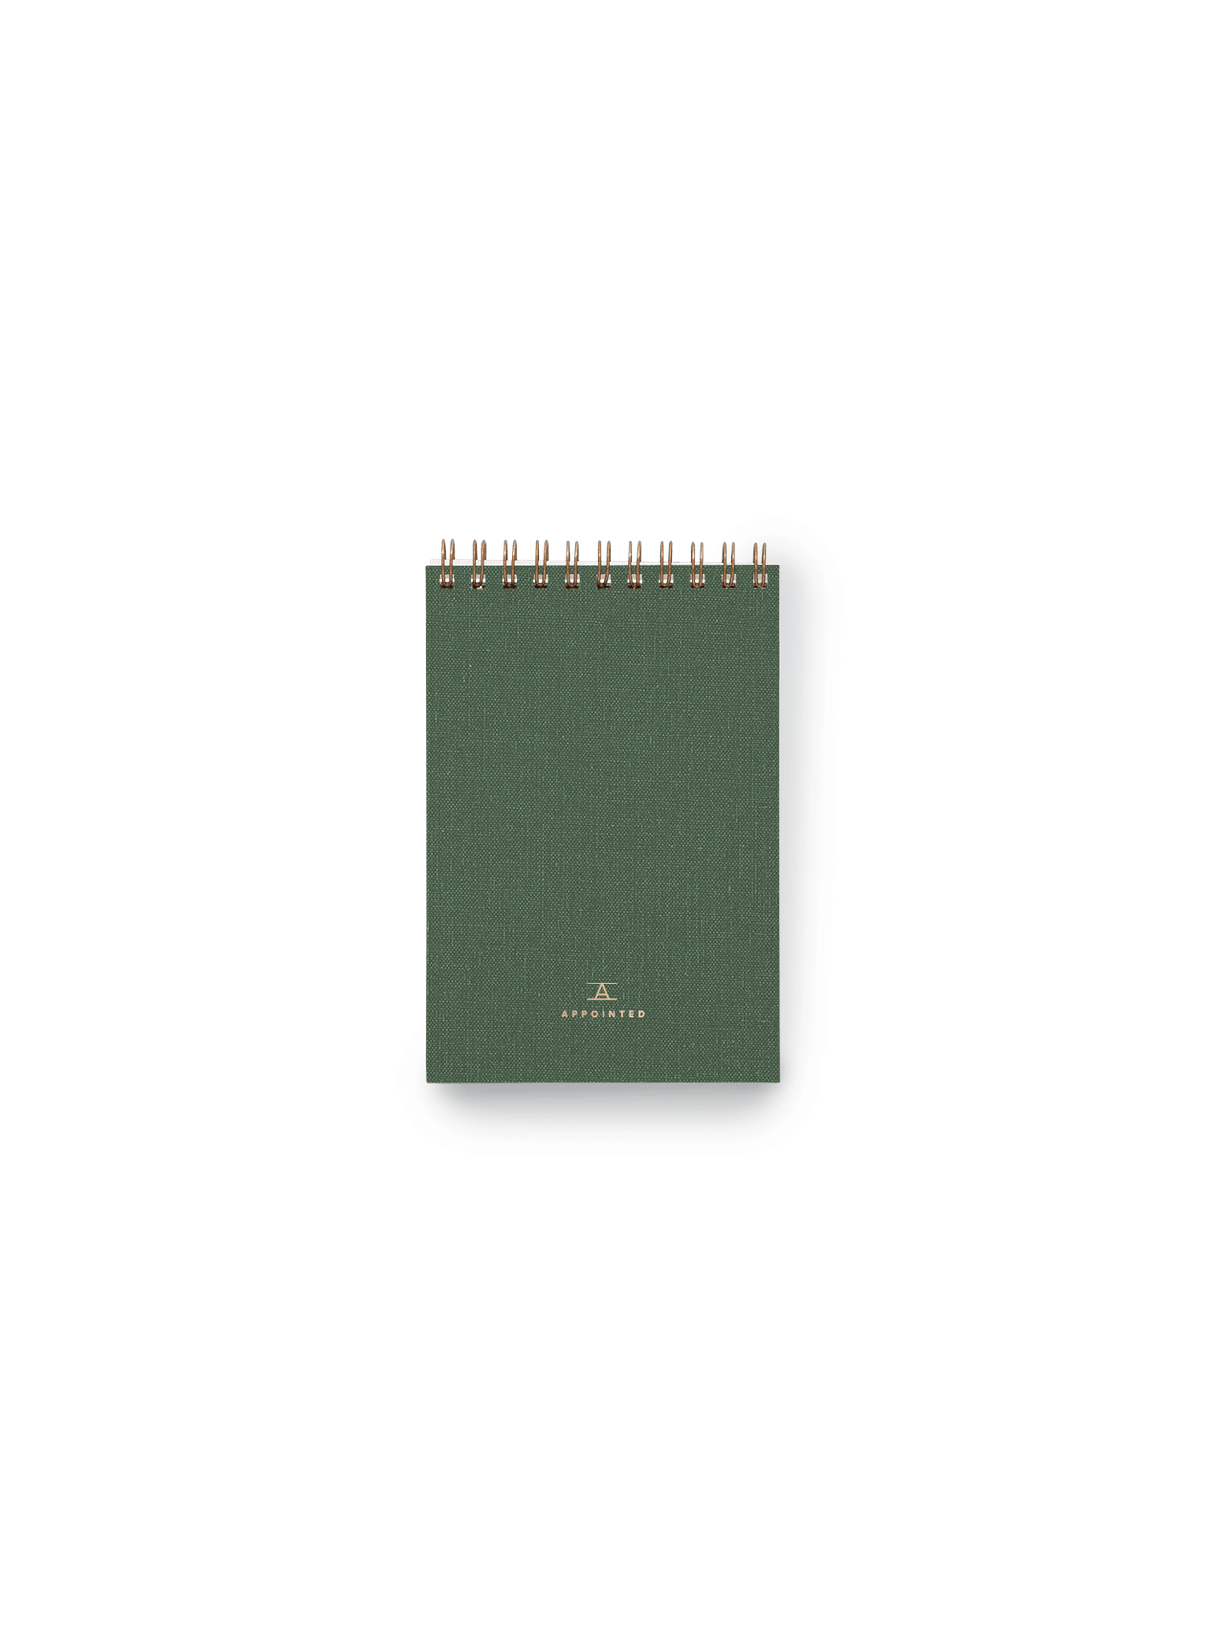 Pocket Notepad with brass wire-o binding and gold foil details || Fern Green